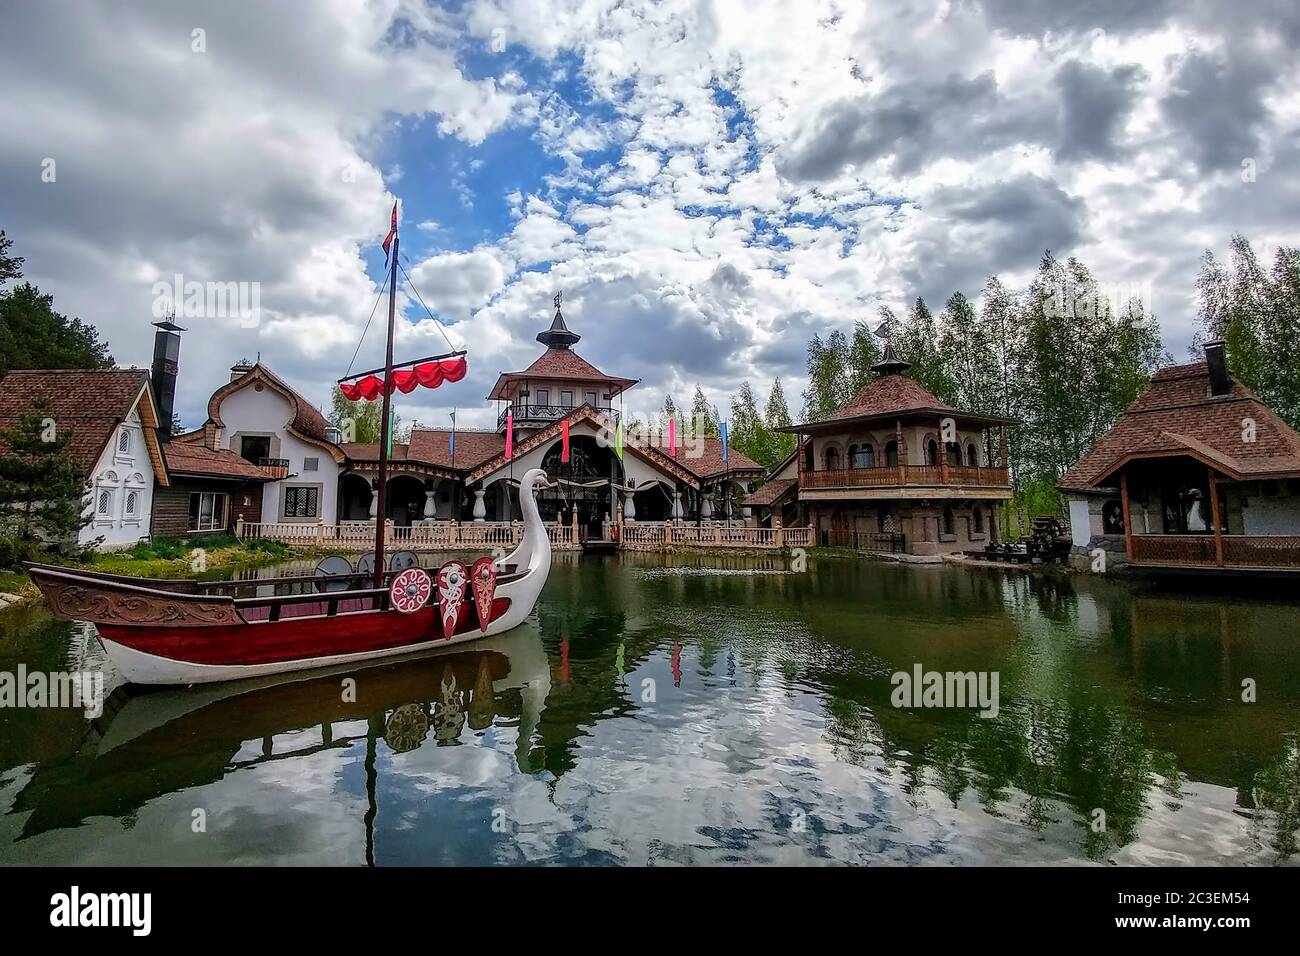 Ryazan, Russia - April 14, 2019: Main exterior of Ethnic hotel 'Как v staroy skazke' in Russian style. Hotel 'Like an old fairy tale.' Made in the ethnic Russian style and located in the forest. Stock Photo